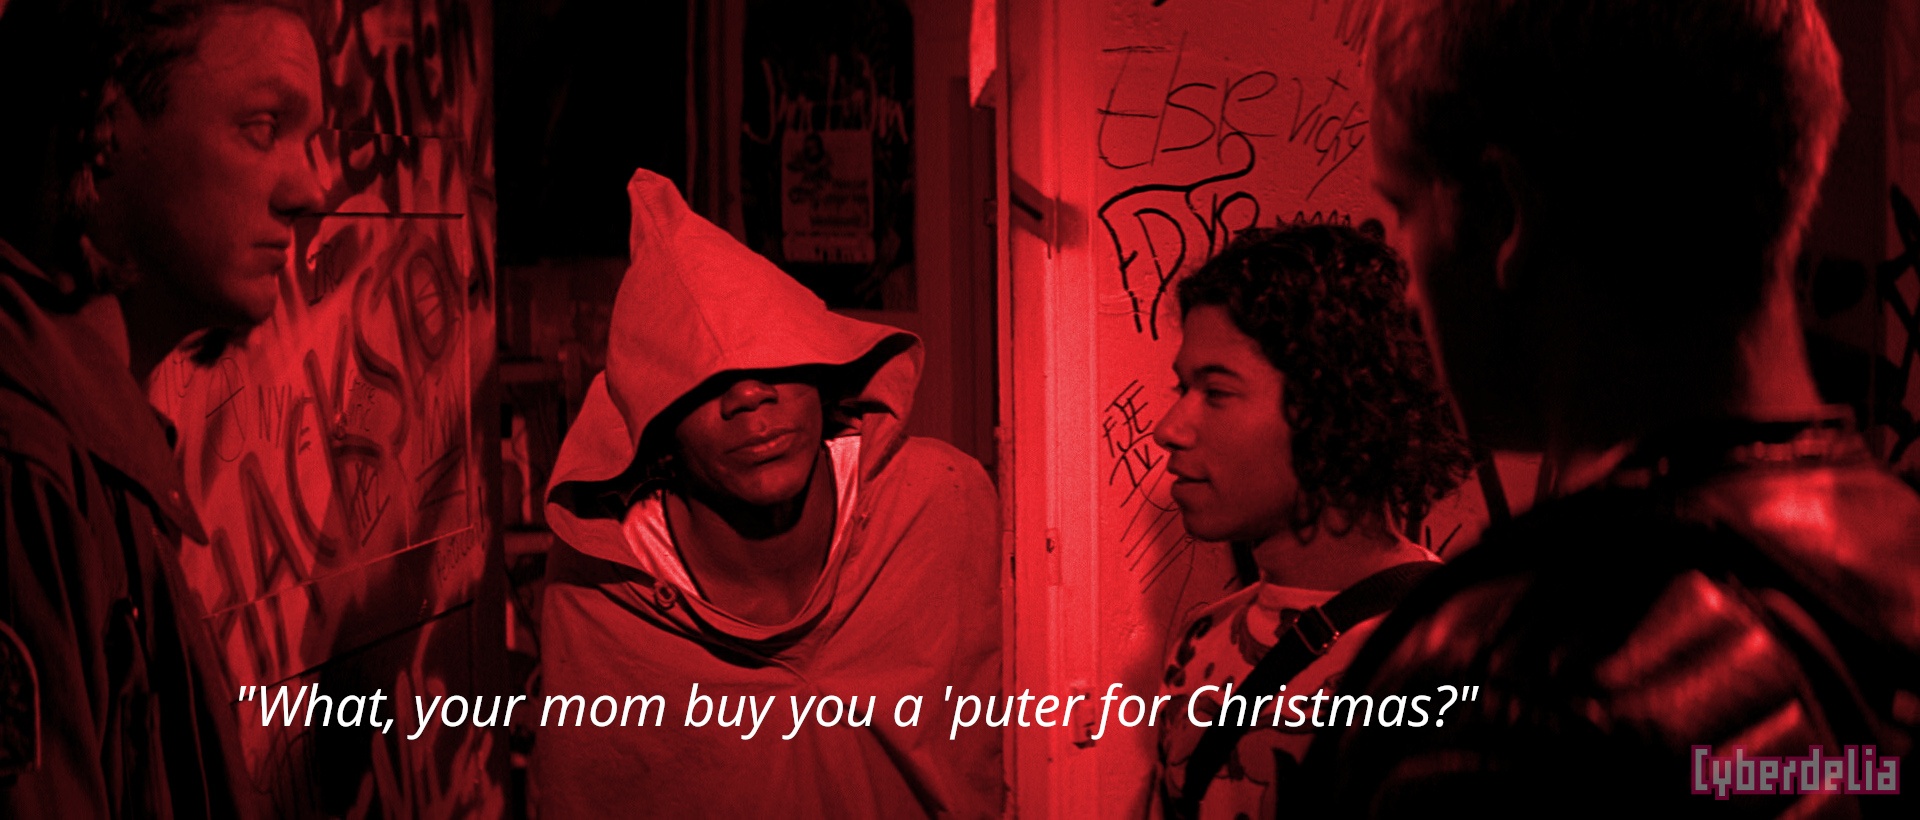 Hackers quote on red image of characters standing at Lord Nikon's door: "What, your mom buy you a 'puter for Christmas?"